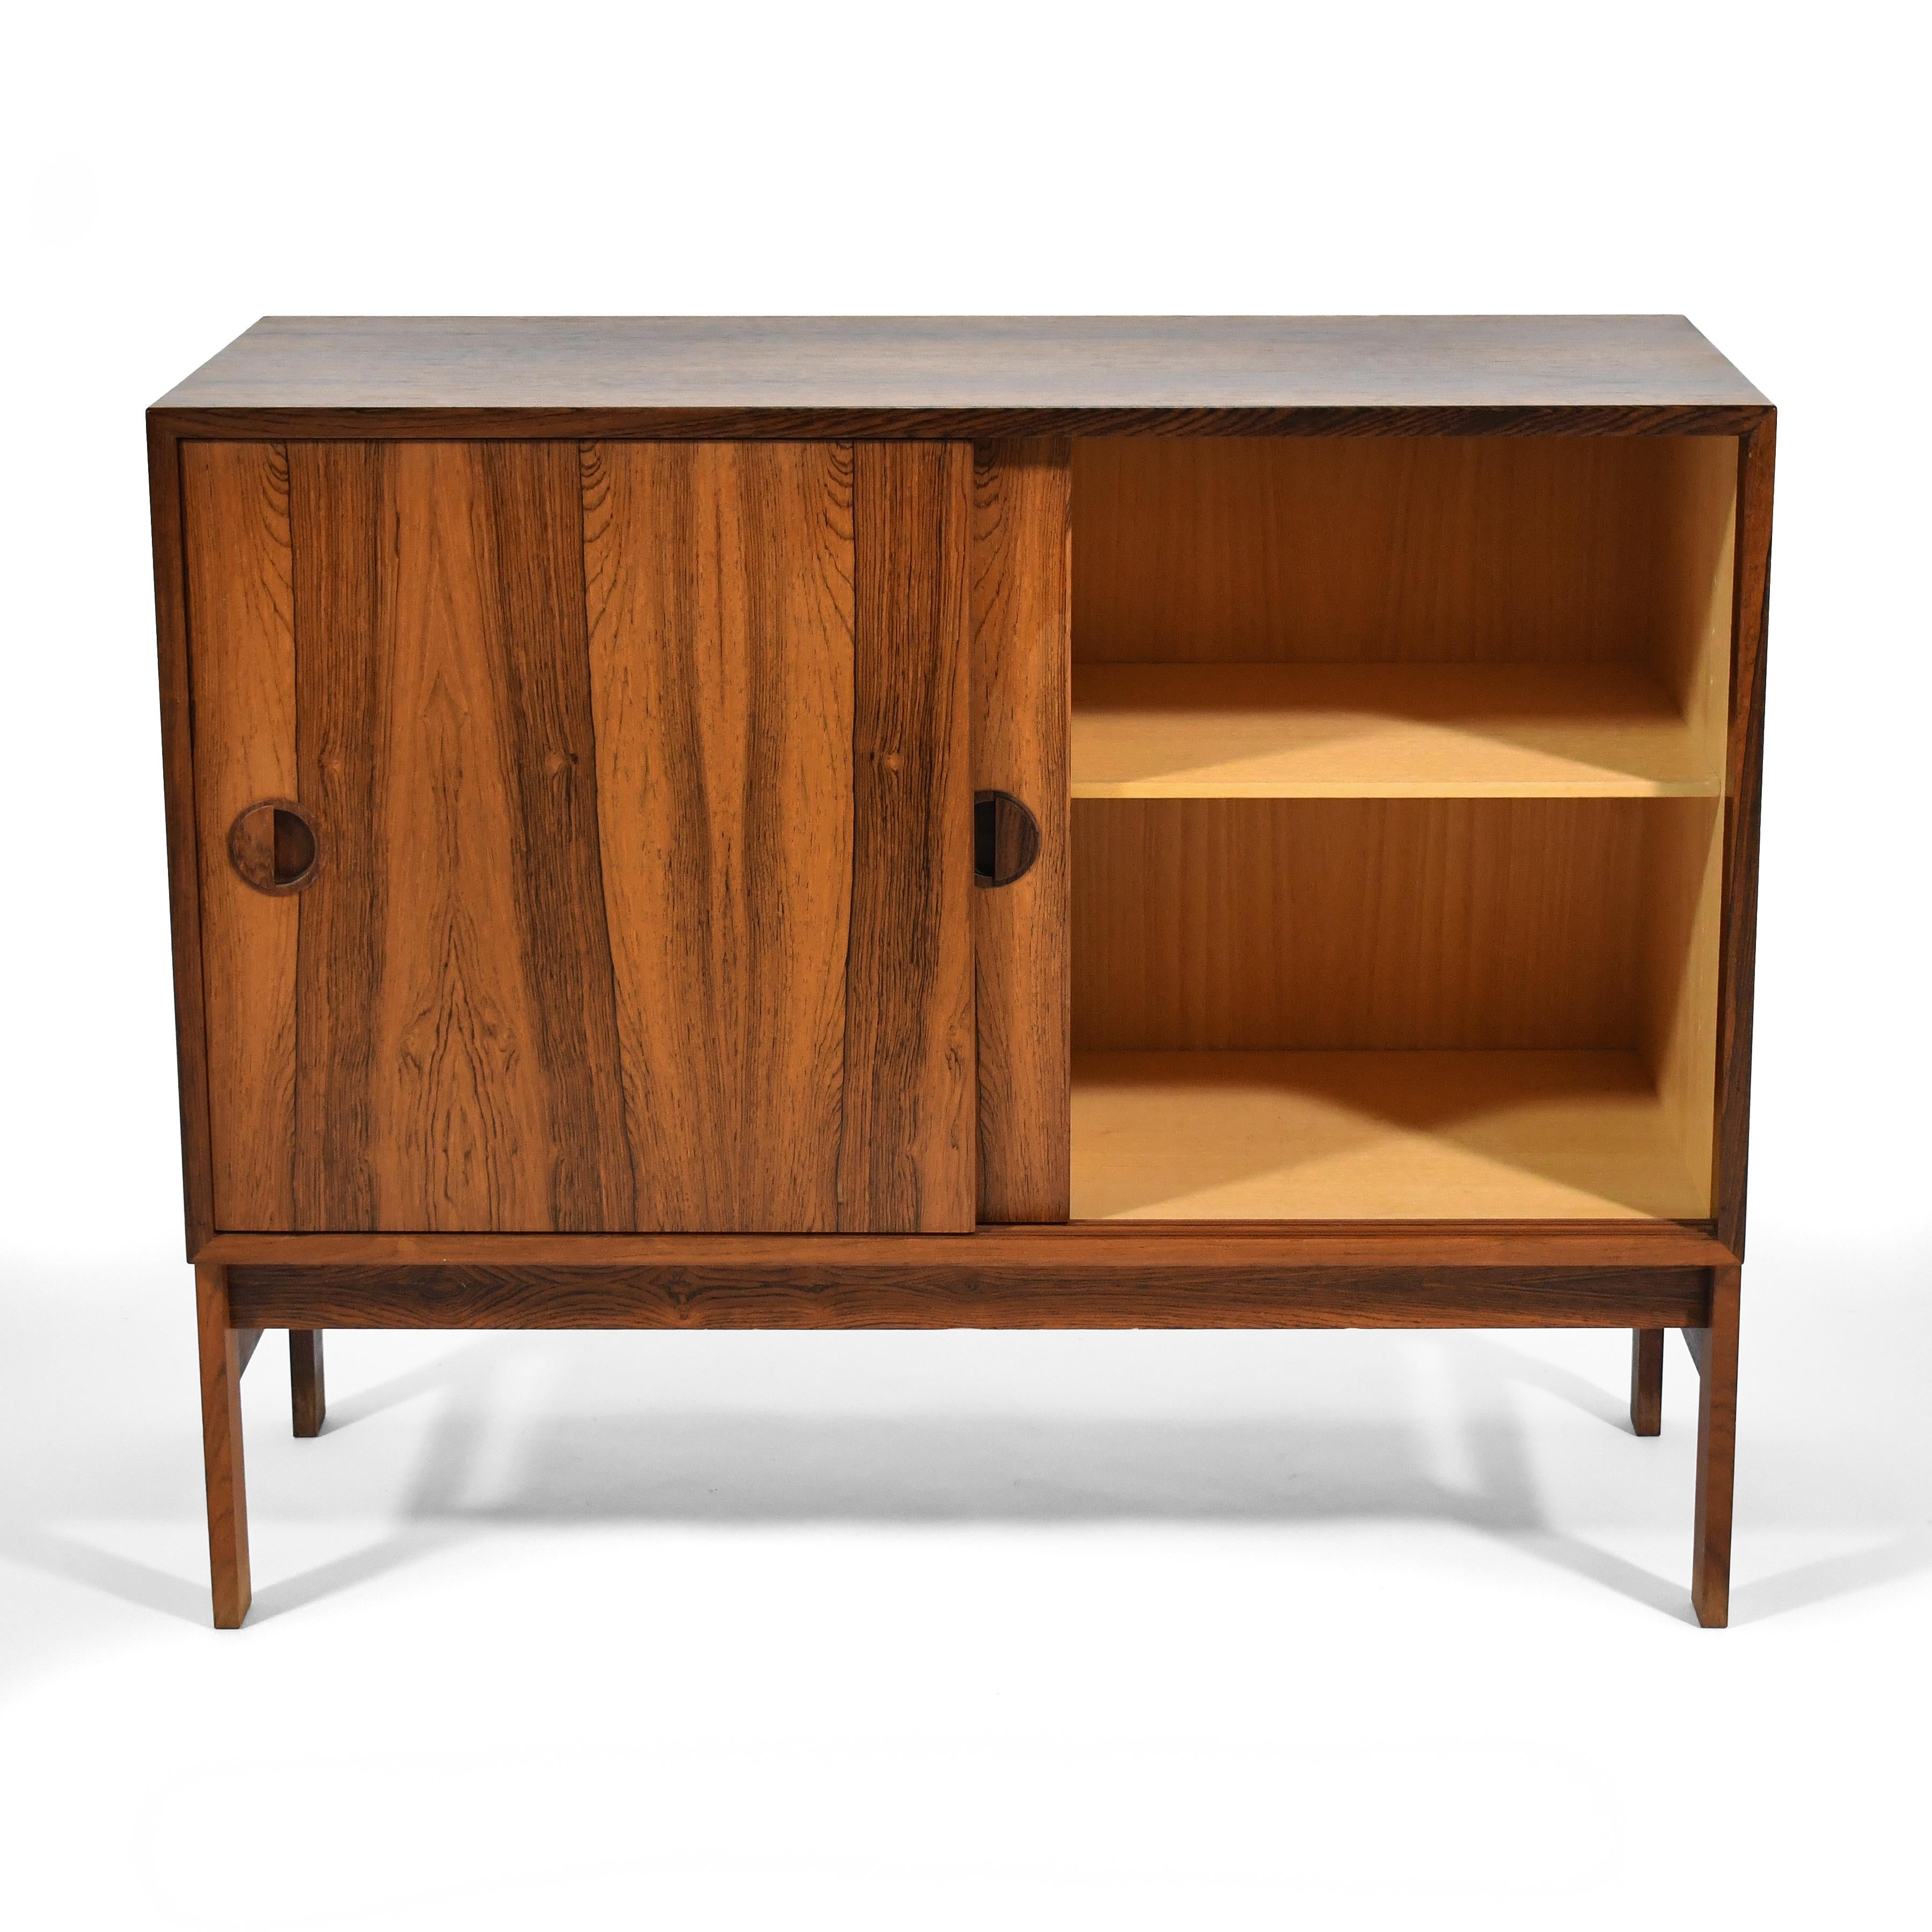 Mid-20th Century Rosewood Cabinet by HG Furniture